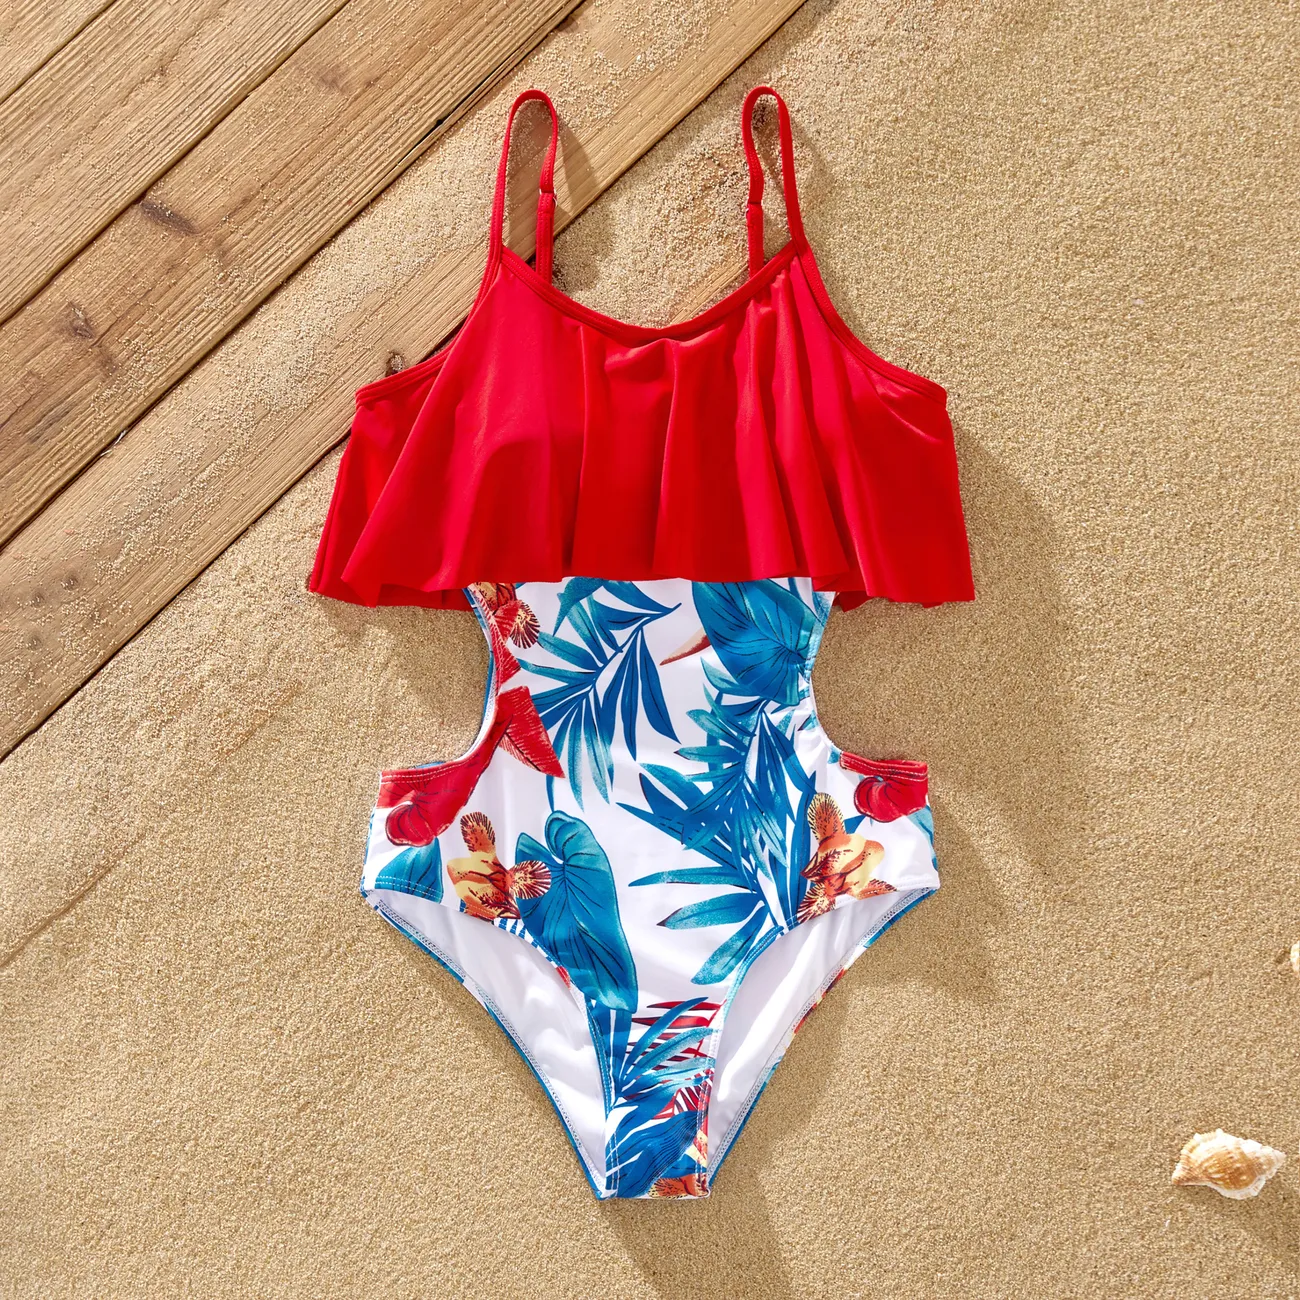 Family Matching Floral Drawstring Swim Trunks or Flounce Cut Out One-Piece Strap Swimsuit Red big image 1